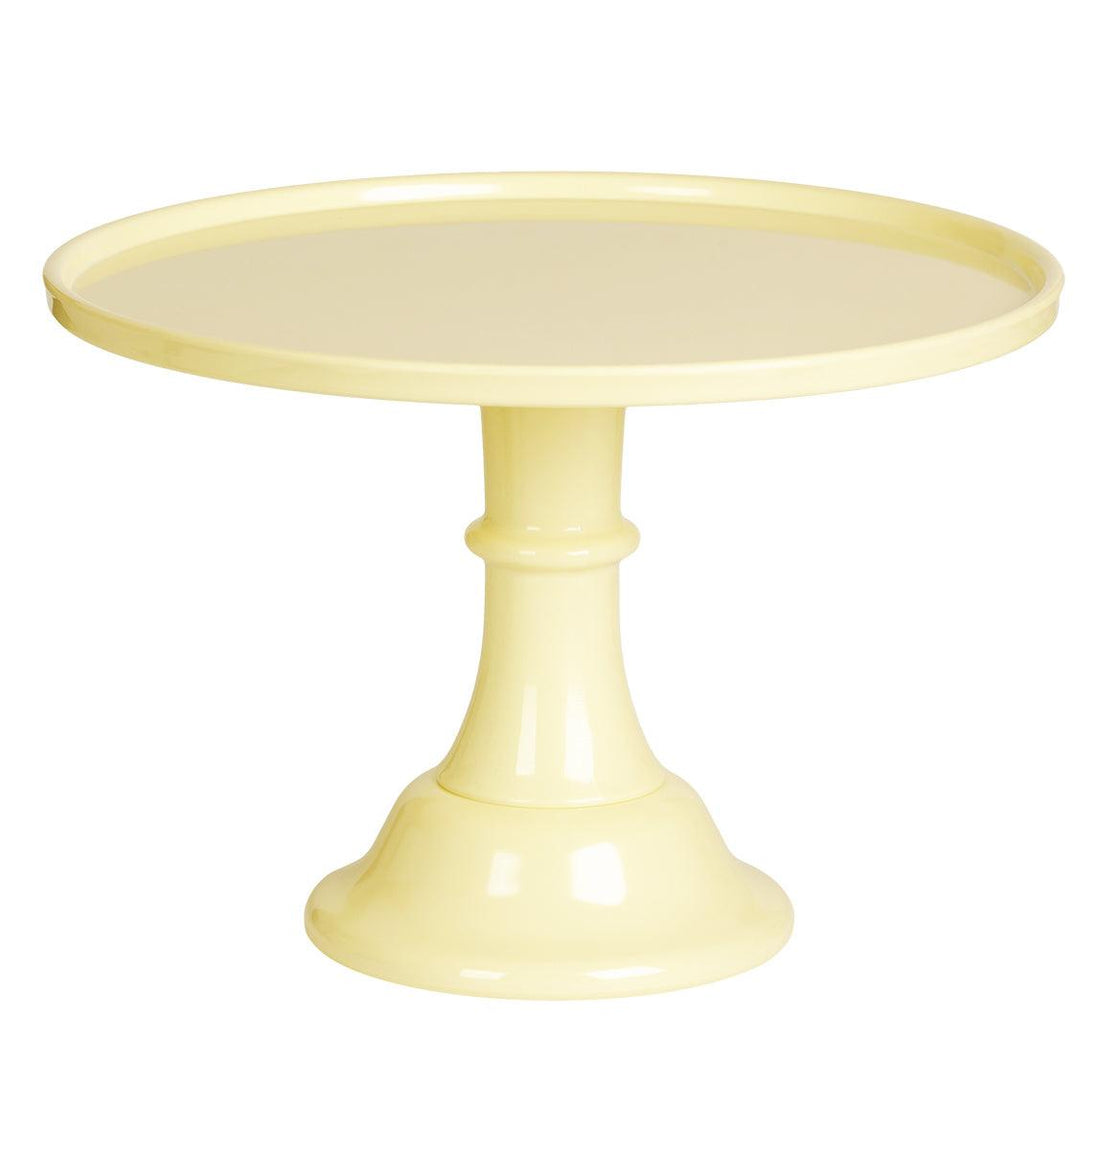  Cake Stand Yellow / Large - My Little Thieves